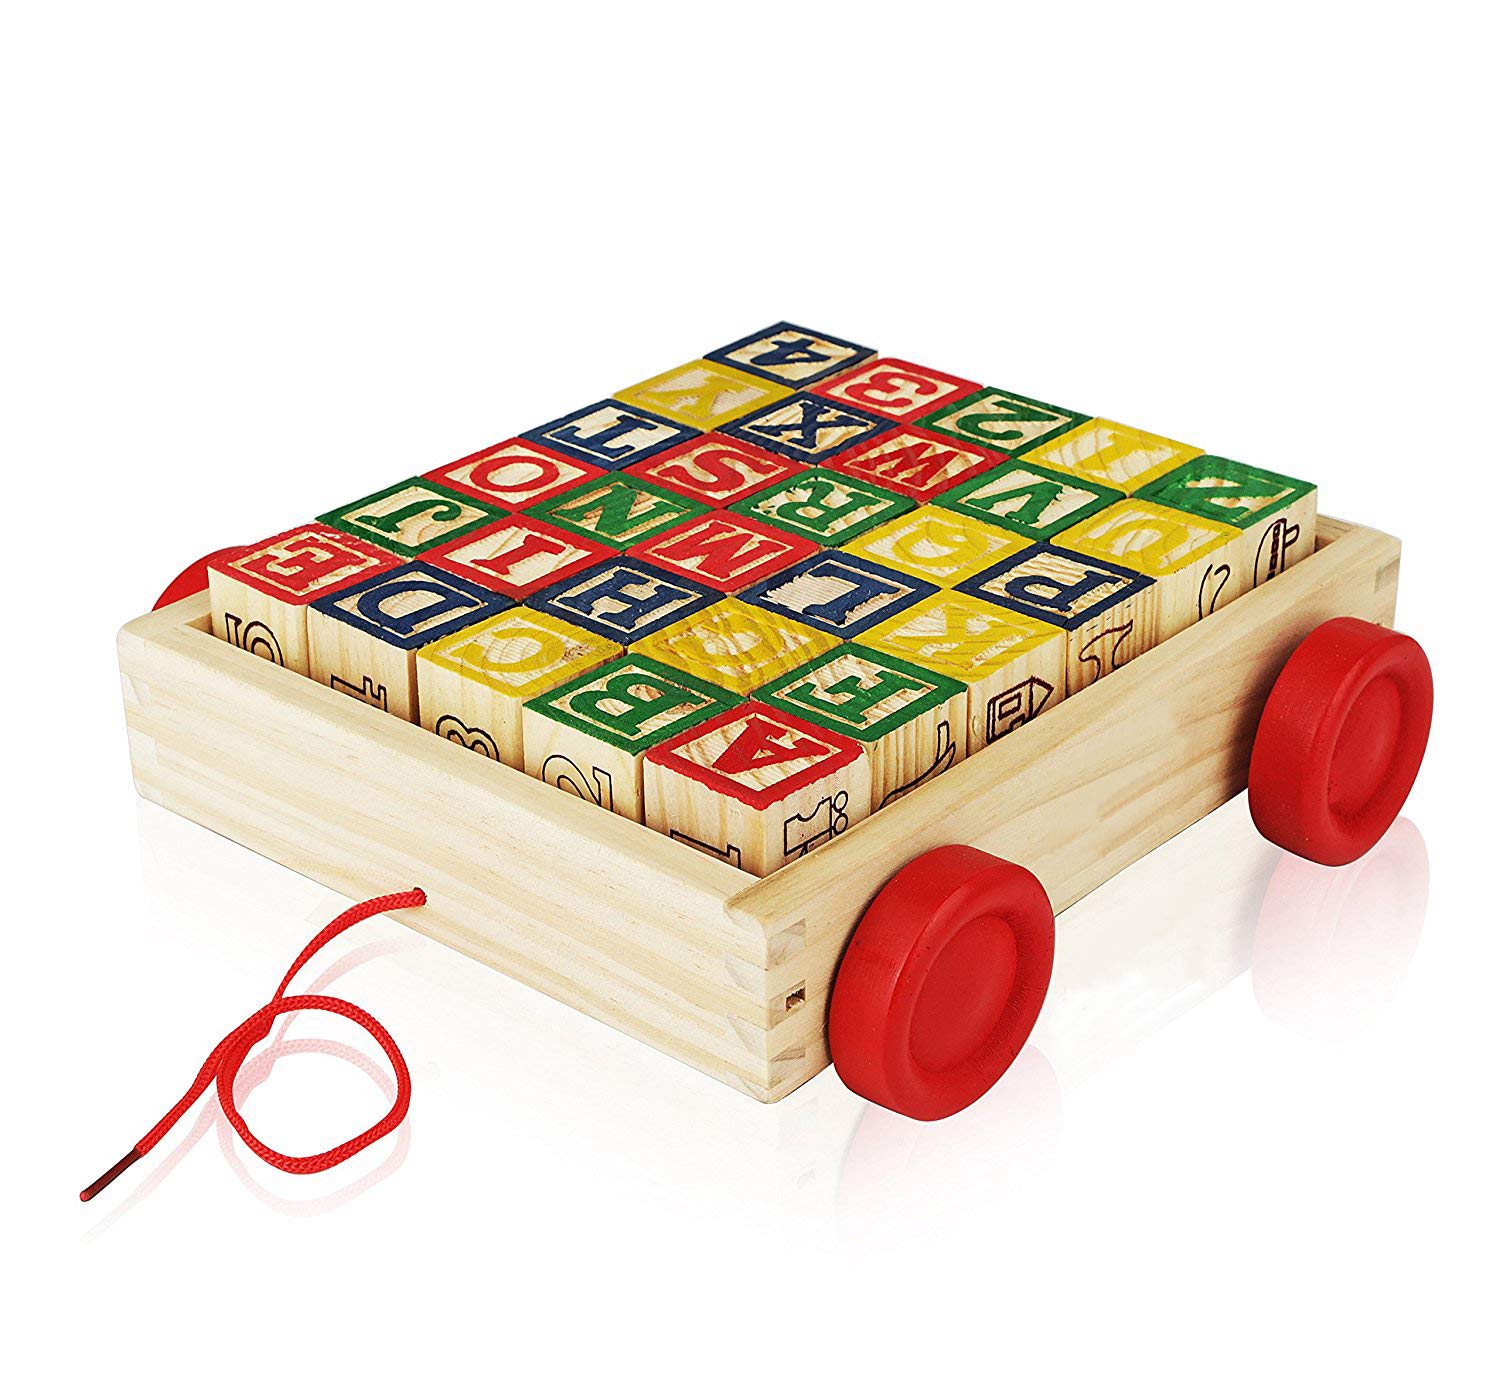 5 Best Wooden Toys – Simple and Effective